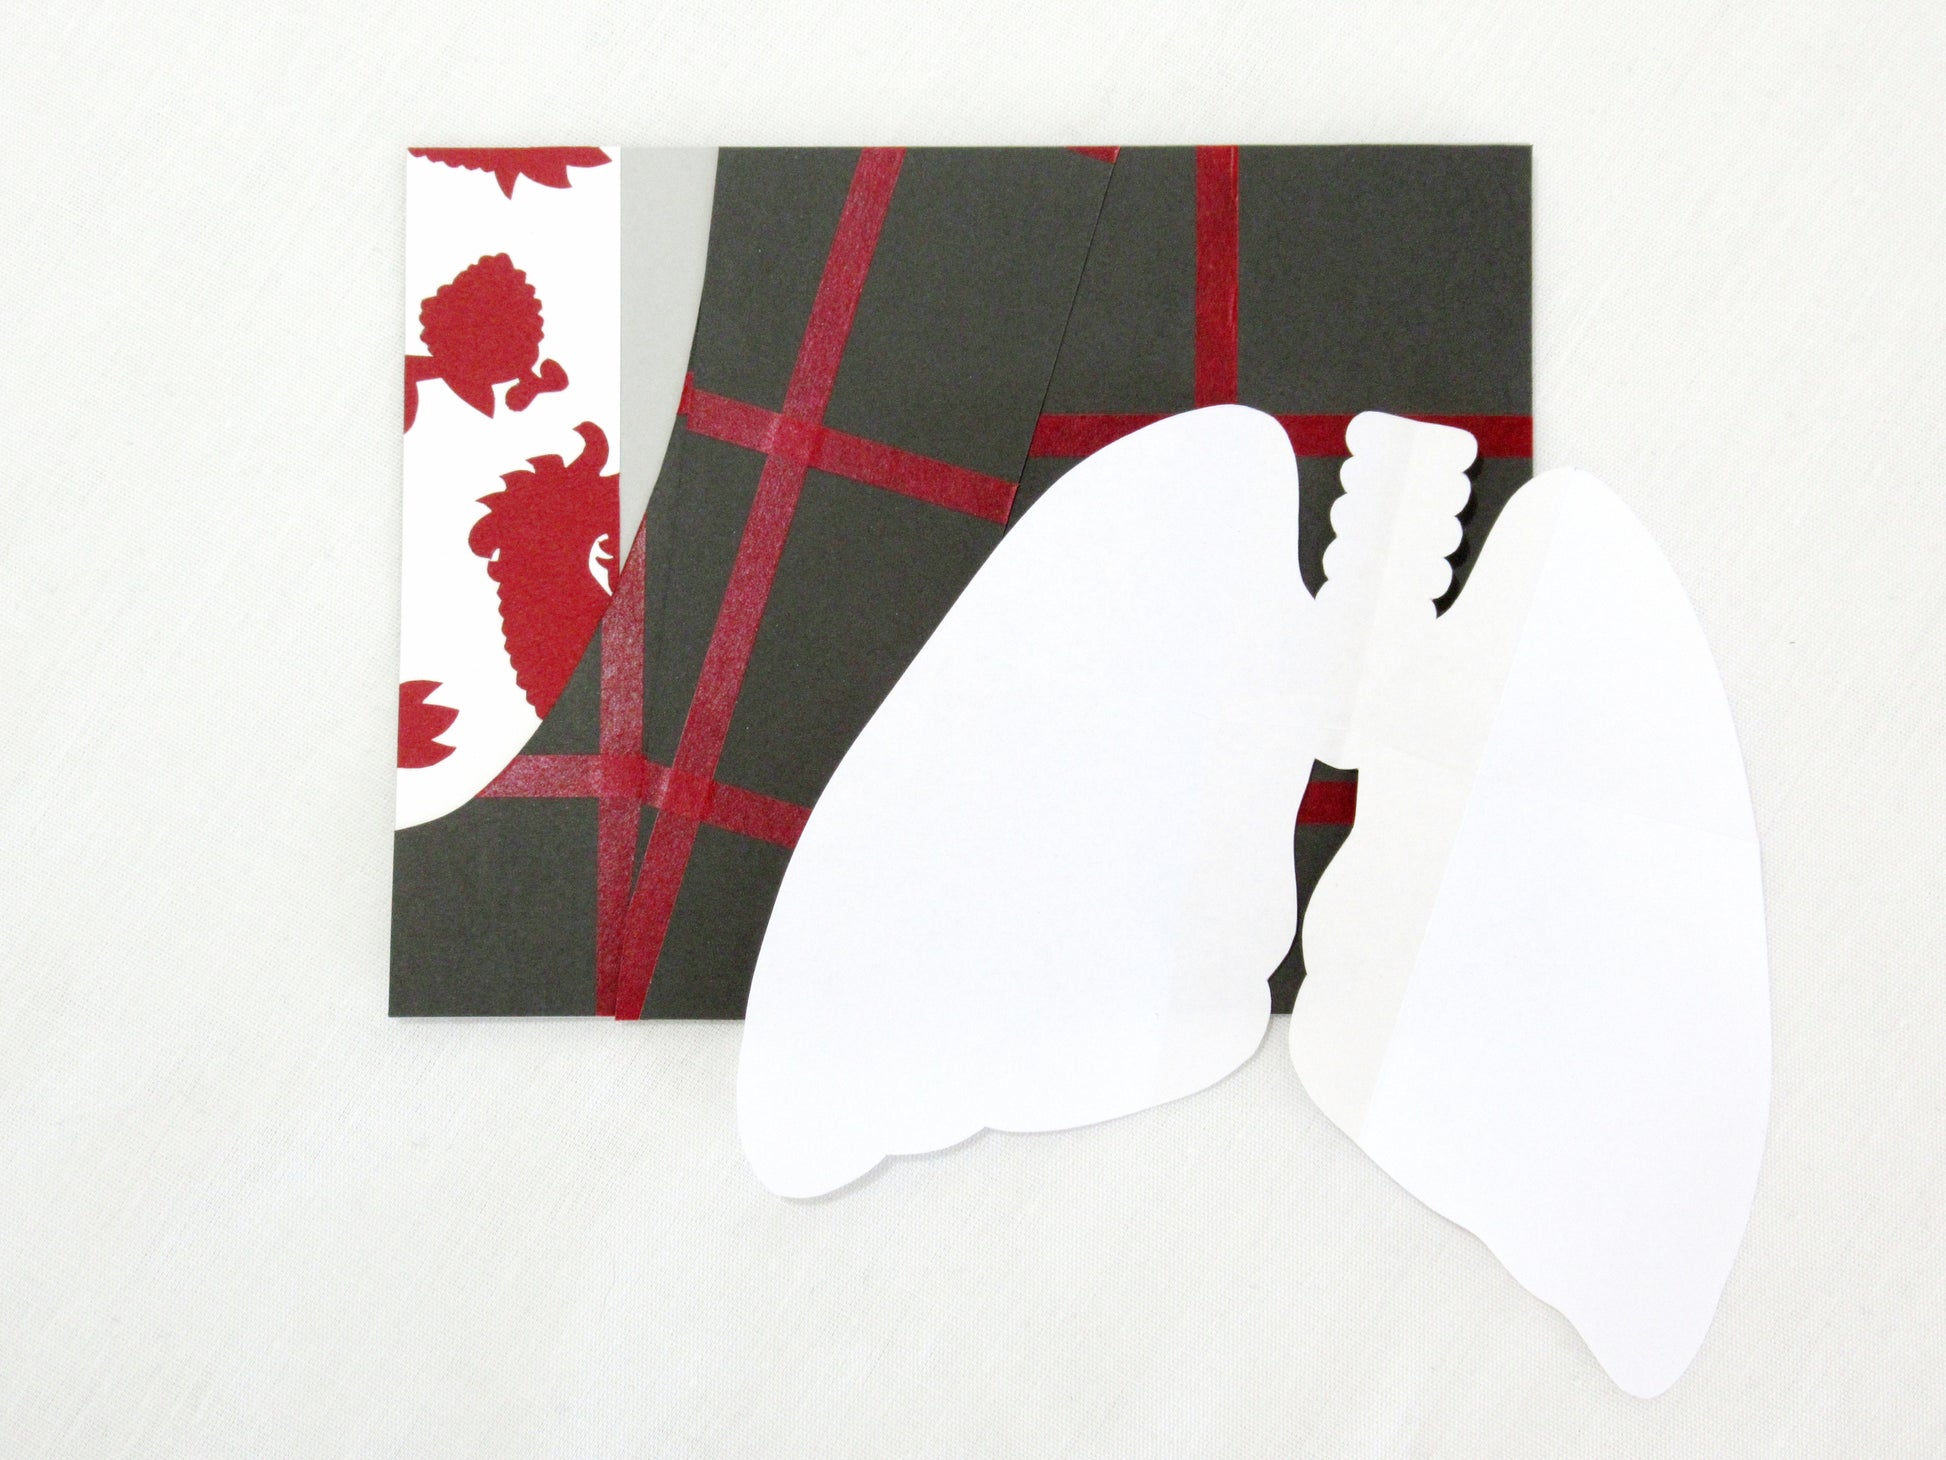 A card lays a white desk. The front of the card looks like a portion of person's suit, their tie and coat. The coat is dark grey with red stripes to form a check pattern. The tie is white with a red paisley pattern. The pocket square has been removed and opened up, showing it's been cut into the shape of a pair of lungs. The whole outfit is designed to look like one worn by Hannibal Lecter in the NBC show Hannibal.